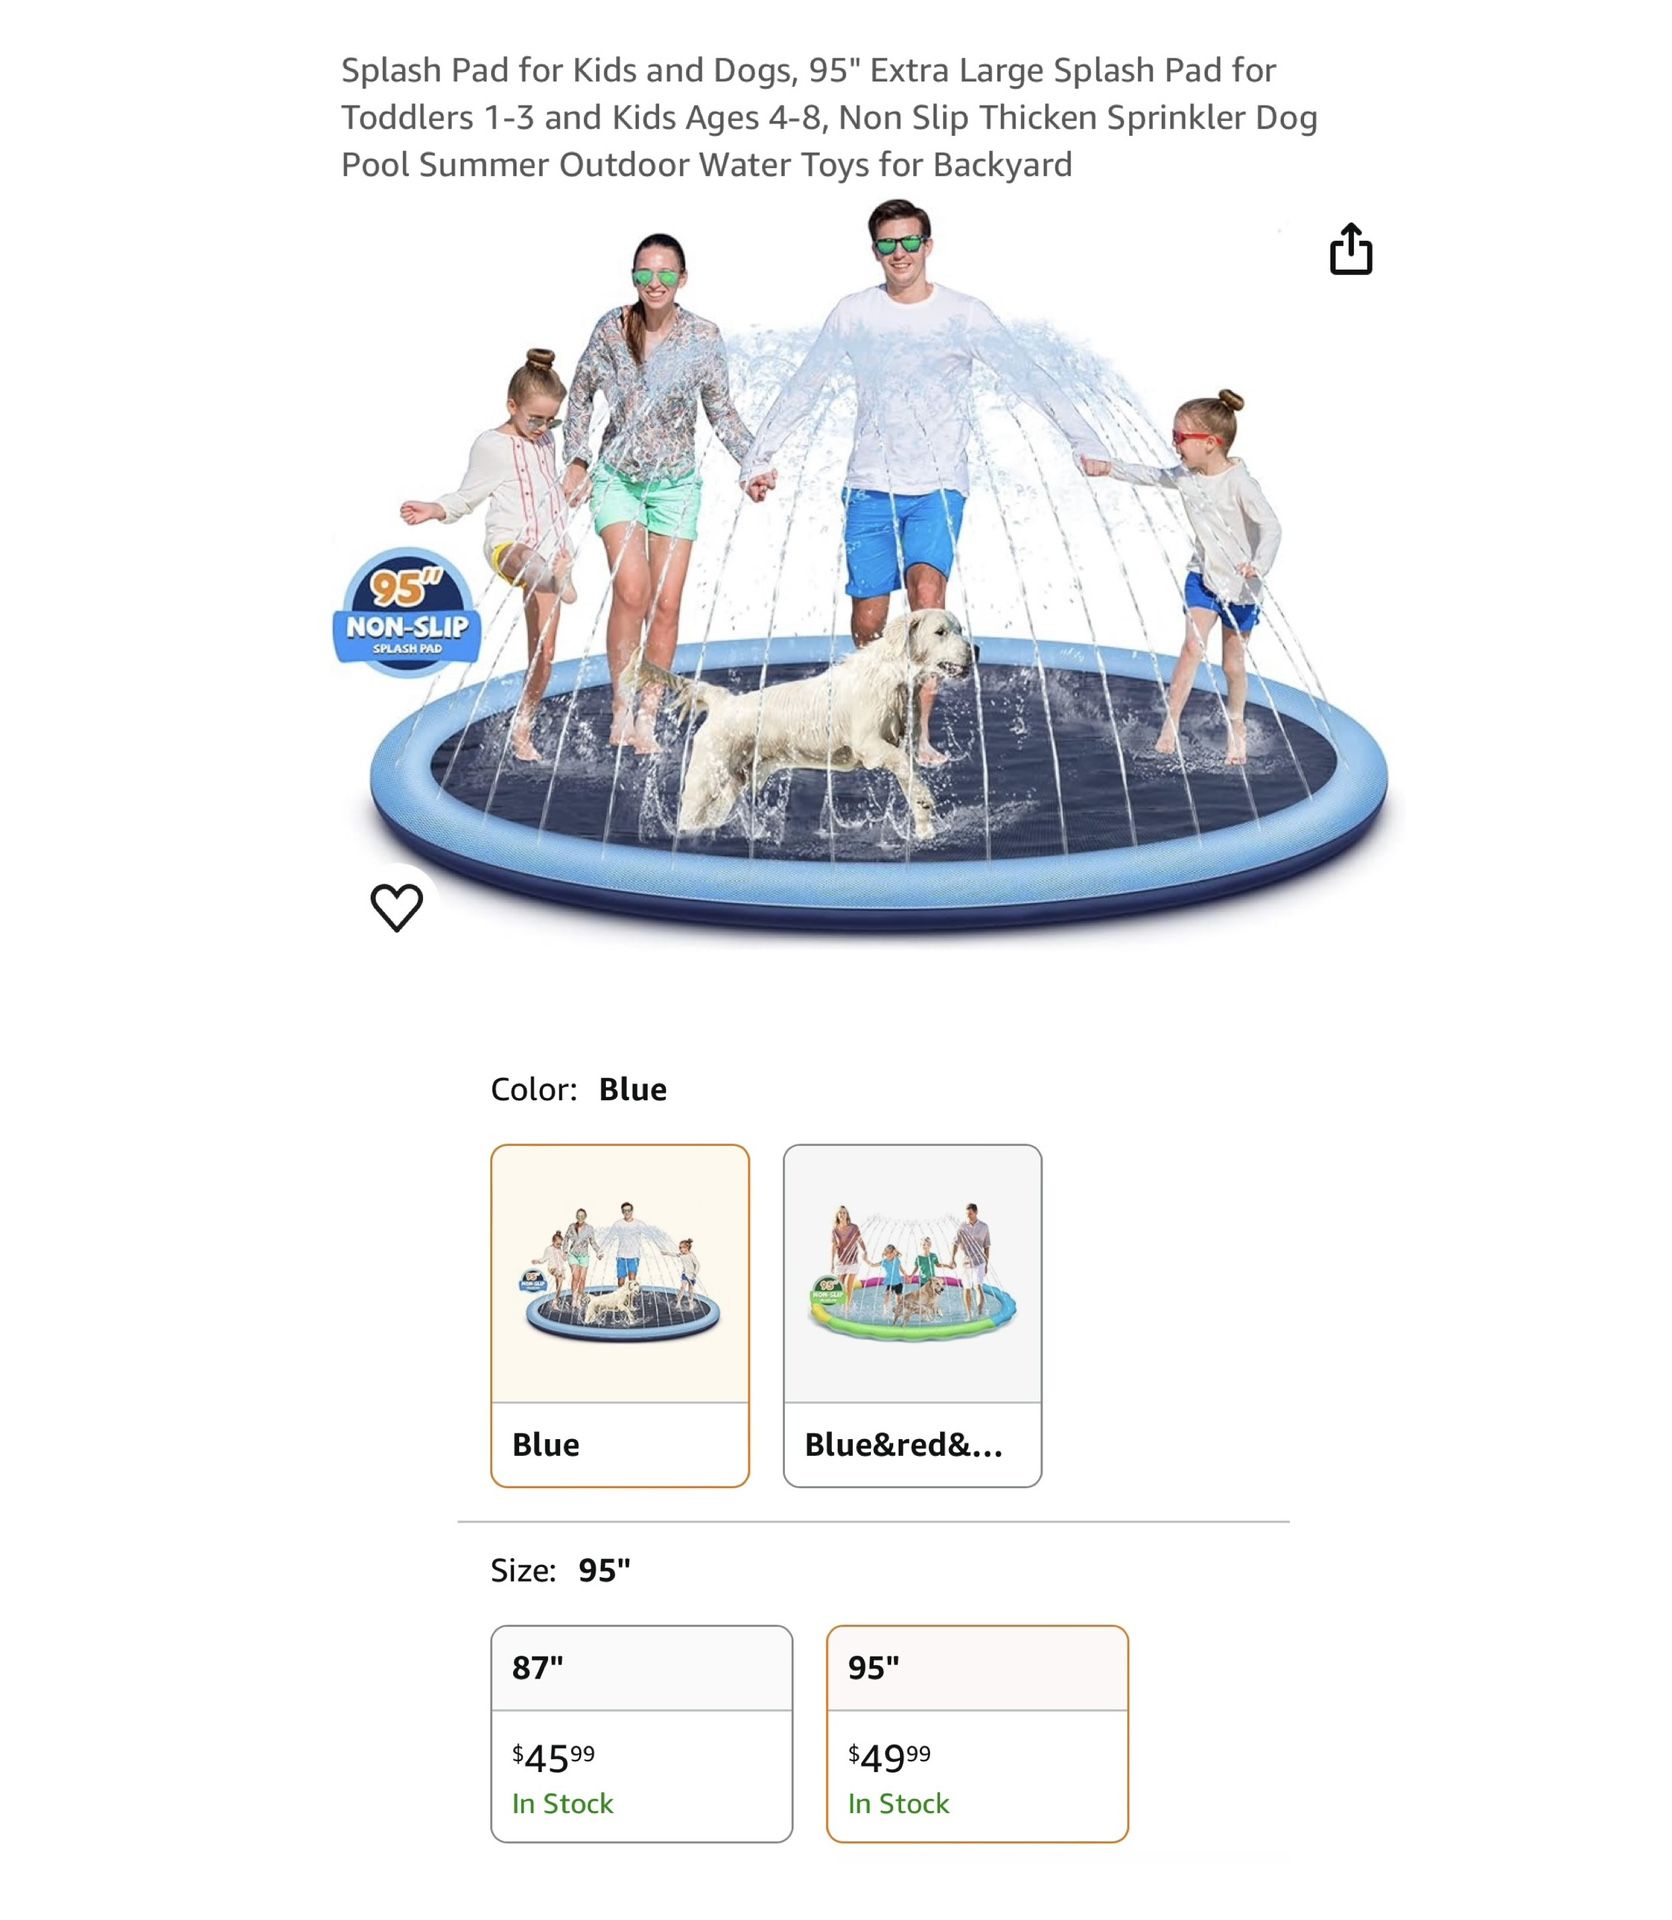 Brand new Splash Pad for Kids and Dogs, 95" Extra Large Splash Pad for Toddlers 1-3 and Kids Ages 4-8, Non Slip Thicken Sprinkler Dog Pool Summer Outd